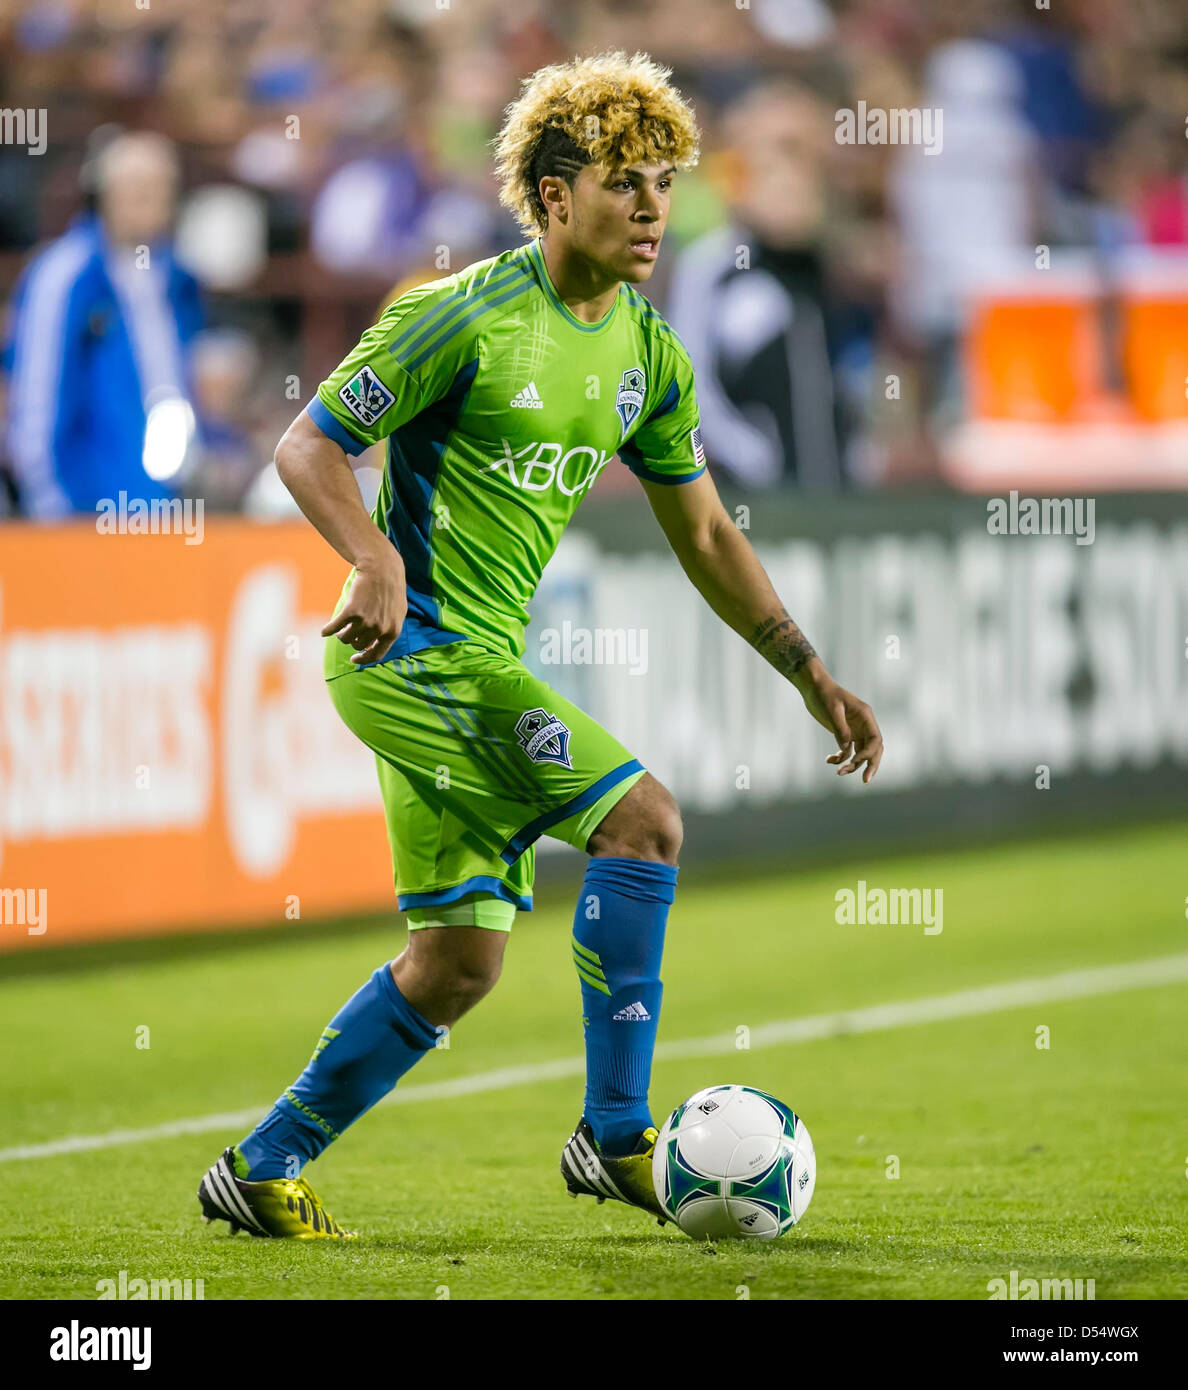 Santa Clara, California, USA. 23rd March 2013. Seattle Sounders defender DeAndre Yedlin in action during the the MLS game between the Seattle Sounders and the San Jose Earthquakes at Buck Shaw Stadium in Santa Clara CA. San Jose defeated Seattle 1-0. Credit:  Cal Sport Media / Alamy Live News Stock Photo